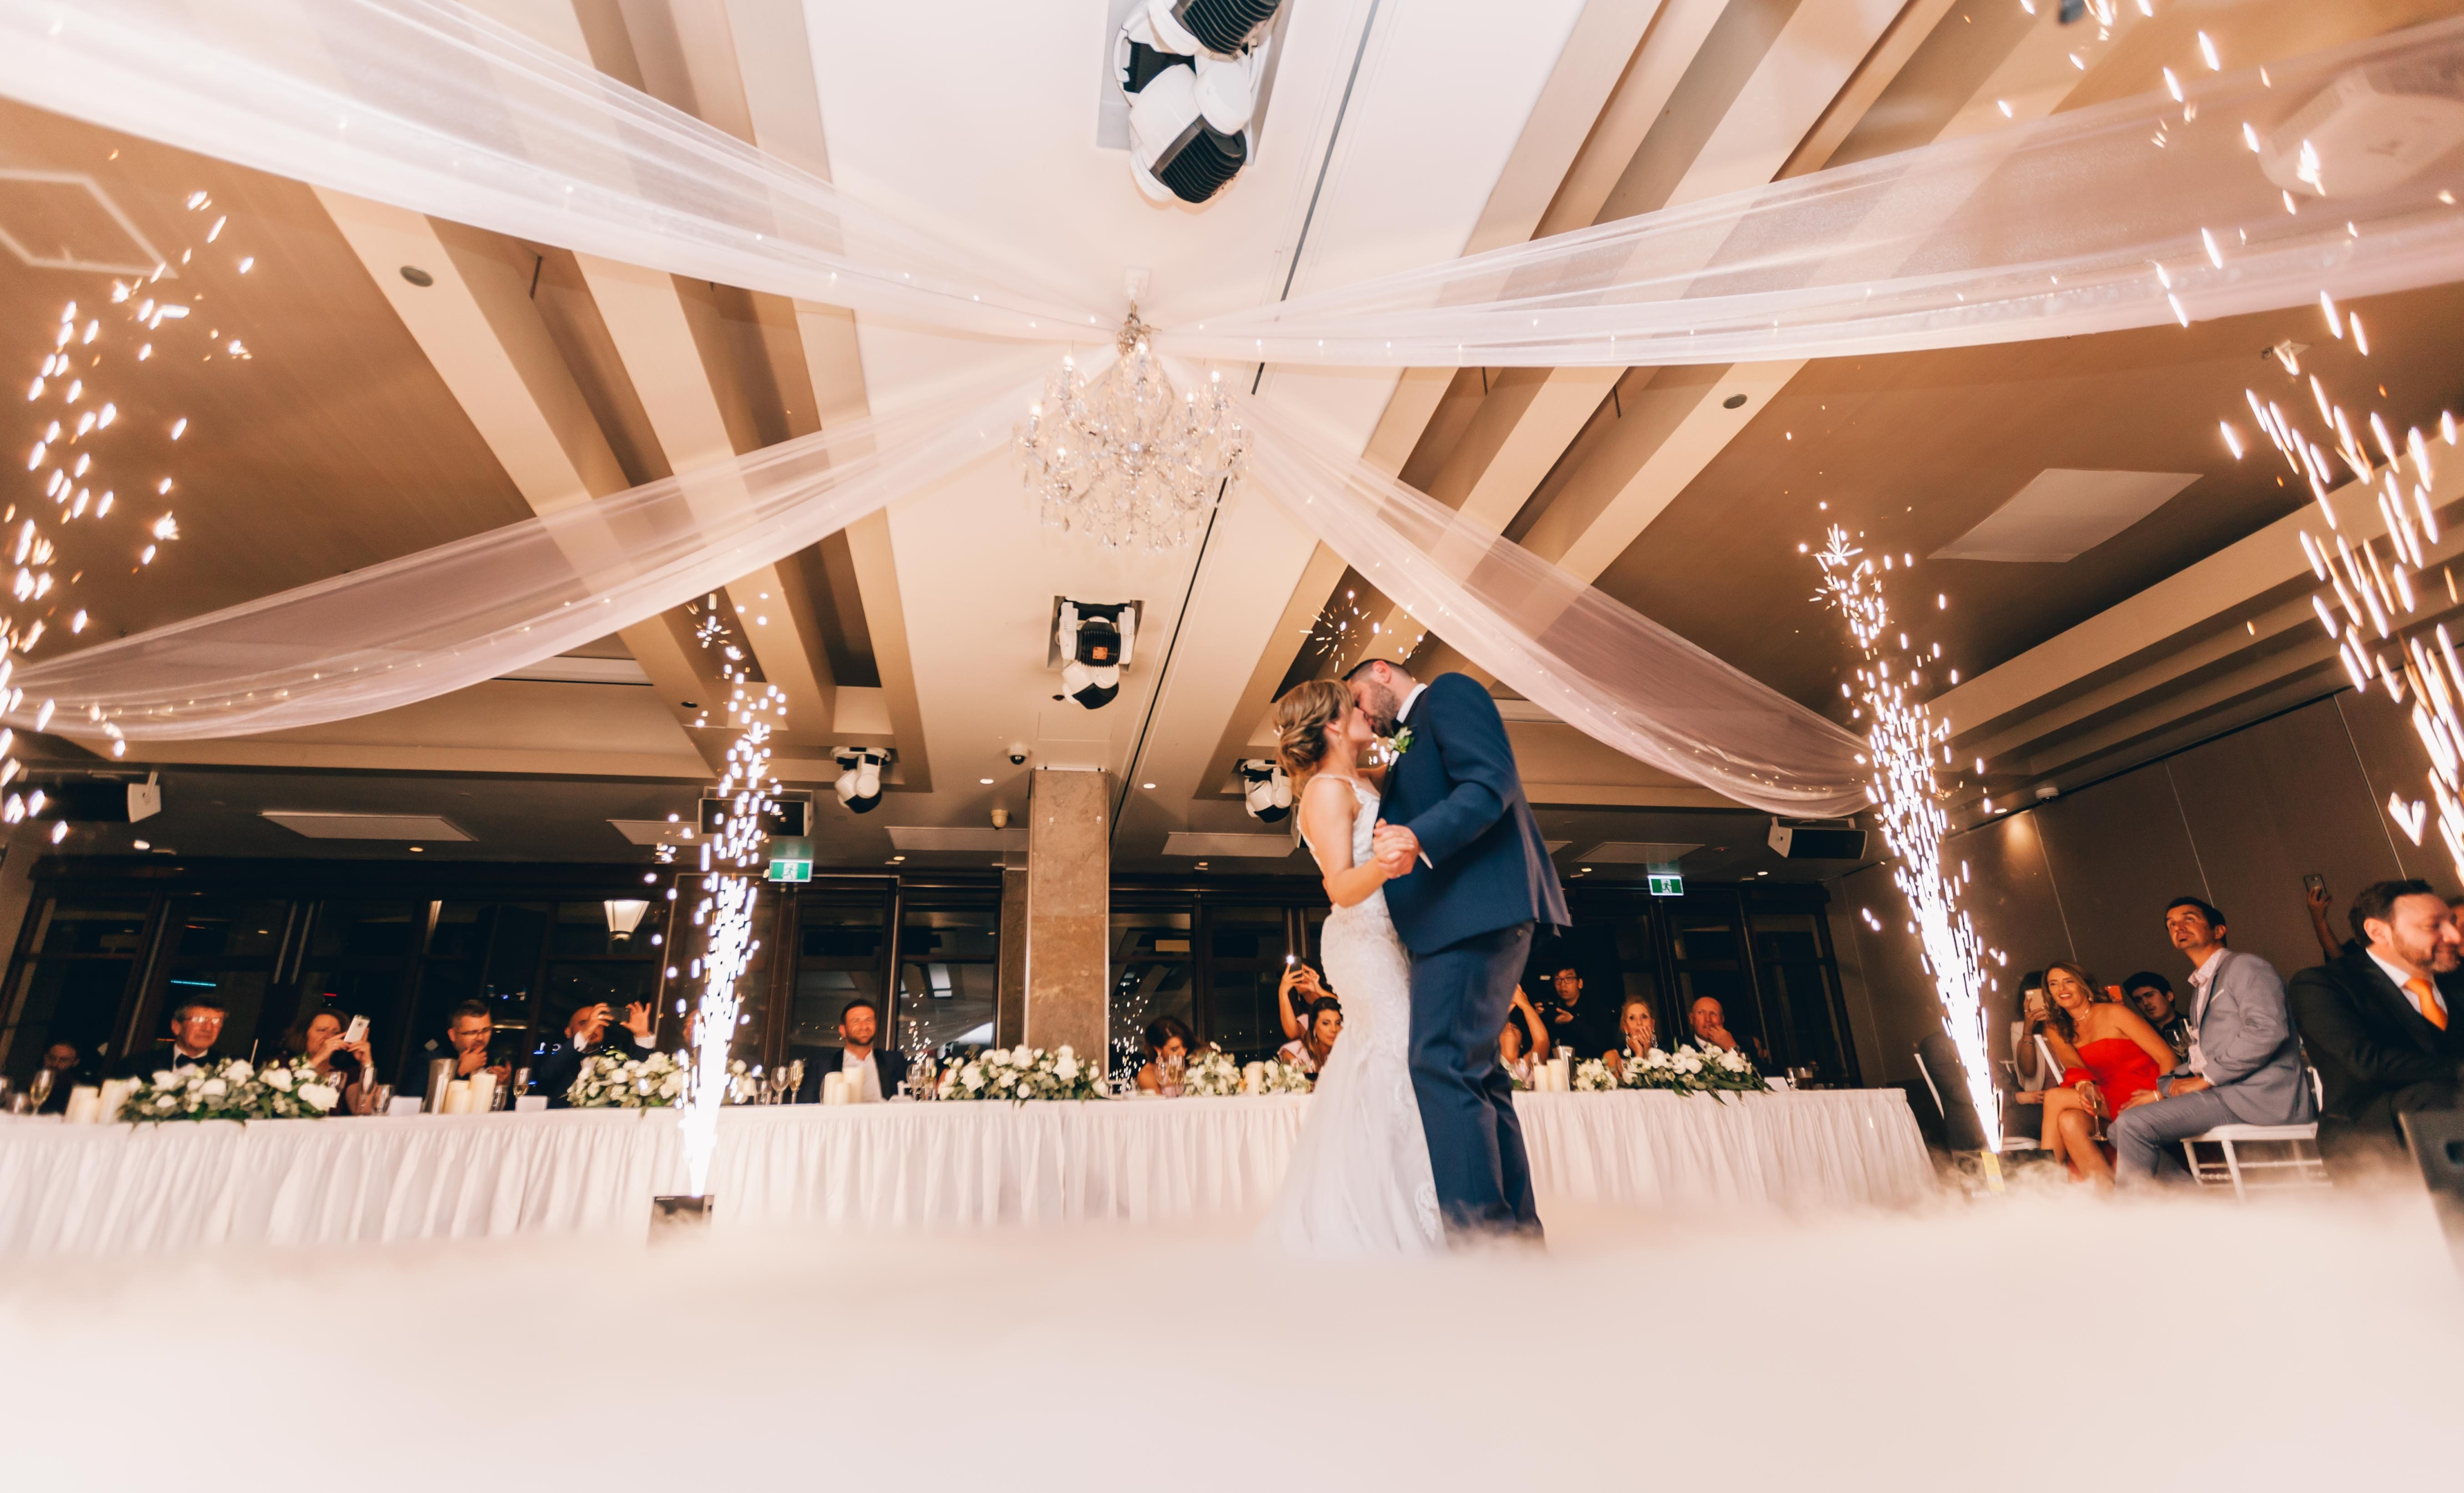 Photo by TranStudios Photography & Video: https://www.pexels.com/photo/low-angle-photography-of-bride-and-groom-dancing-3082764/